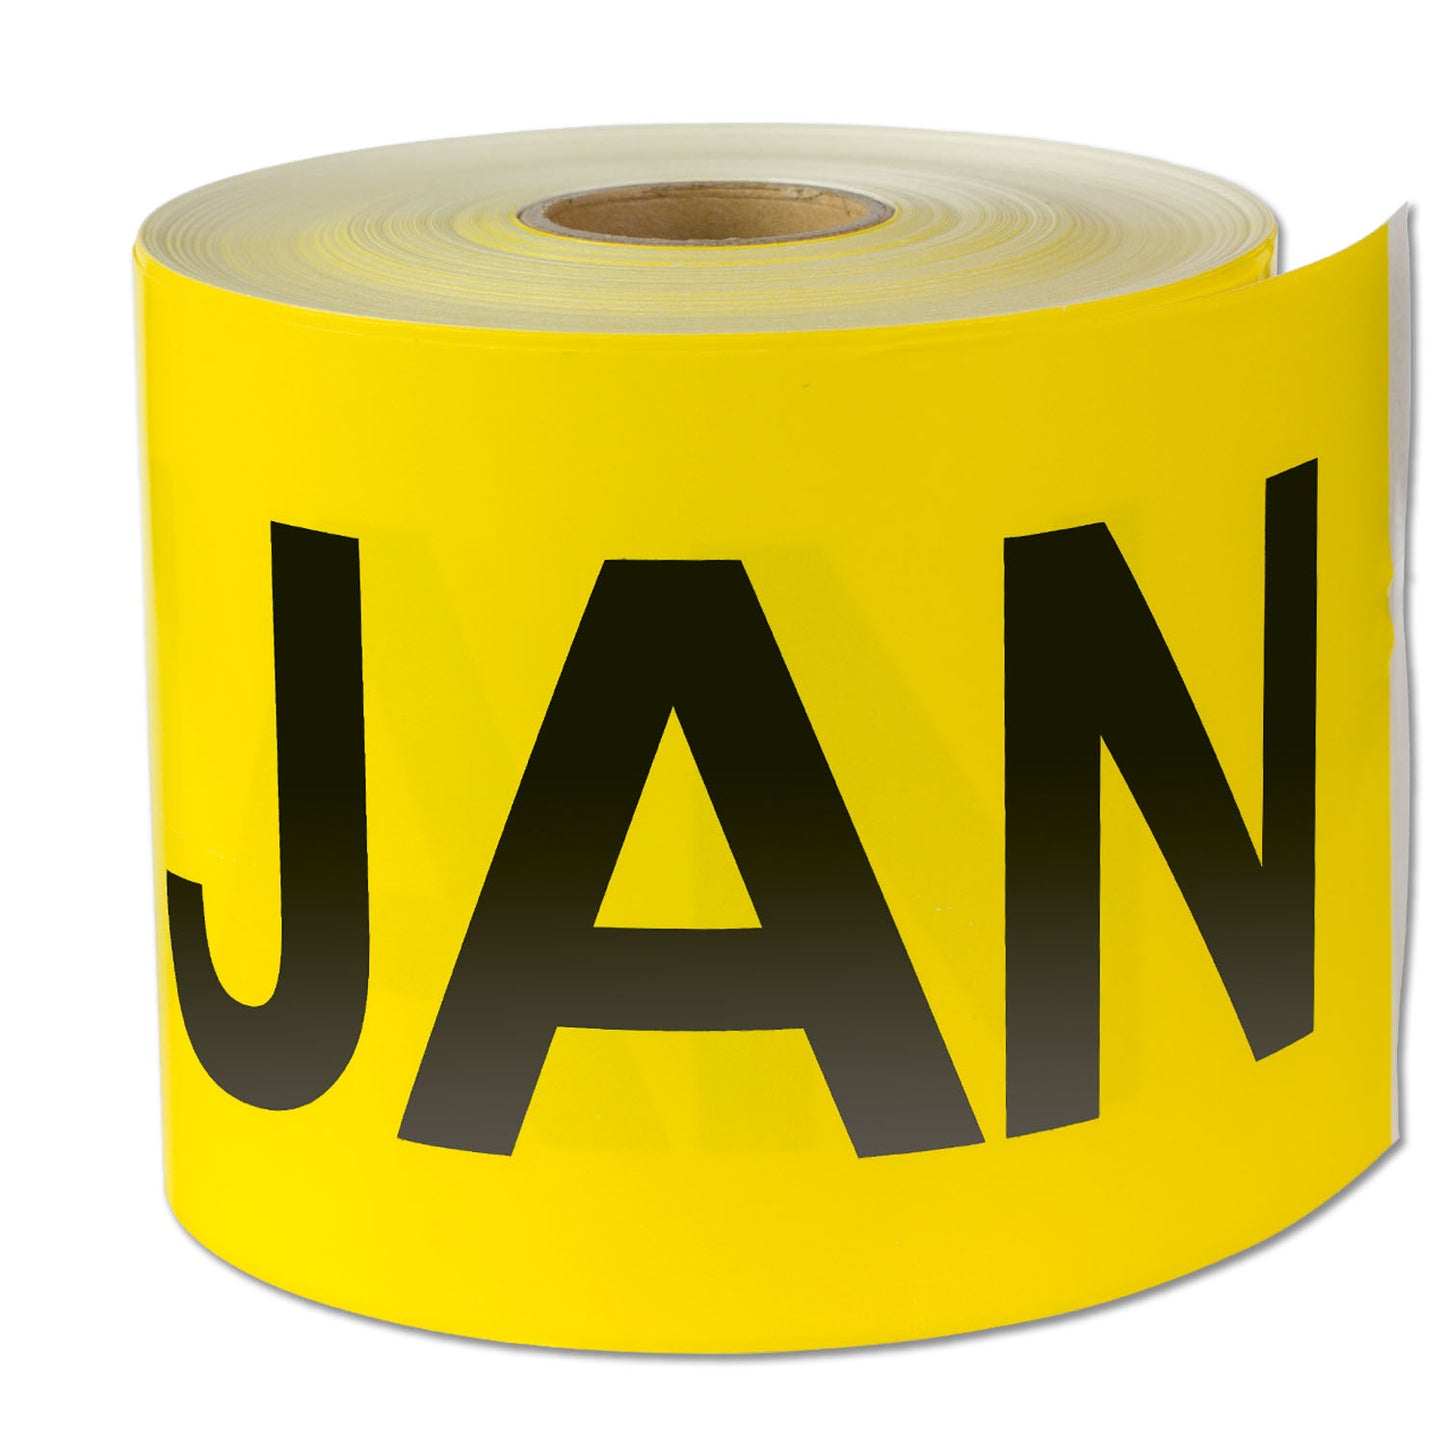 6 x 3 inch | Months of the Year: January Stickers